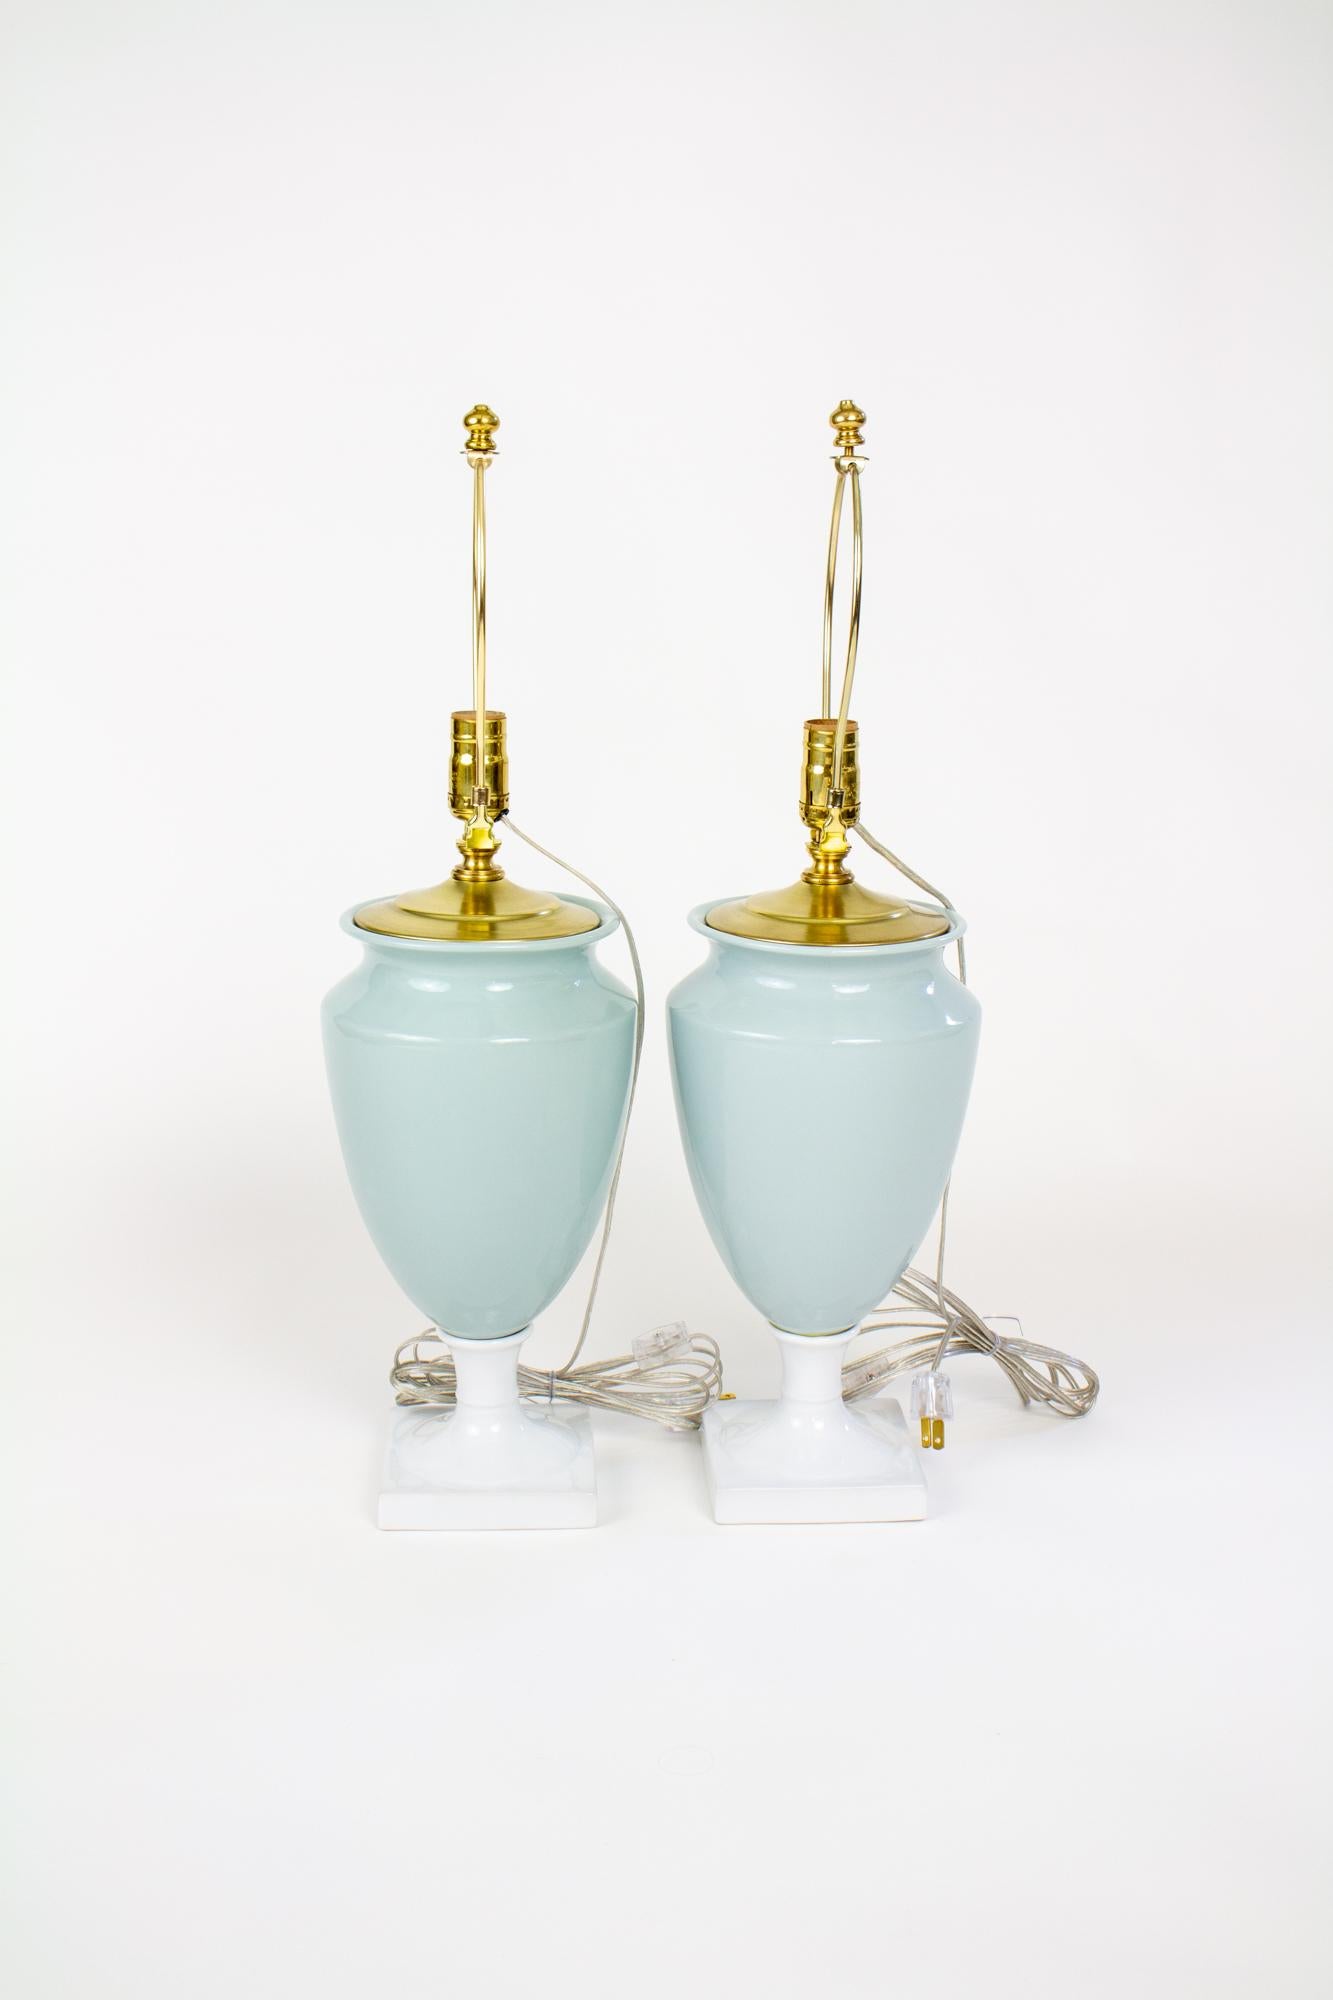 Late 20th Century celadon and white porcelain urn table lamps, a pair. Classically shaped porcelain table lamps, celadon with a white porcelain stem and base. The porcelain is from the 1990’s and was non destructively turned into custom lamps in our